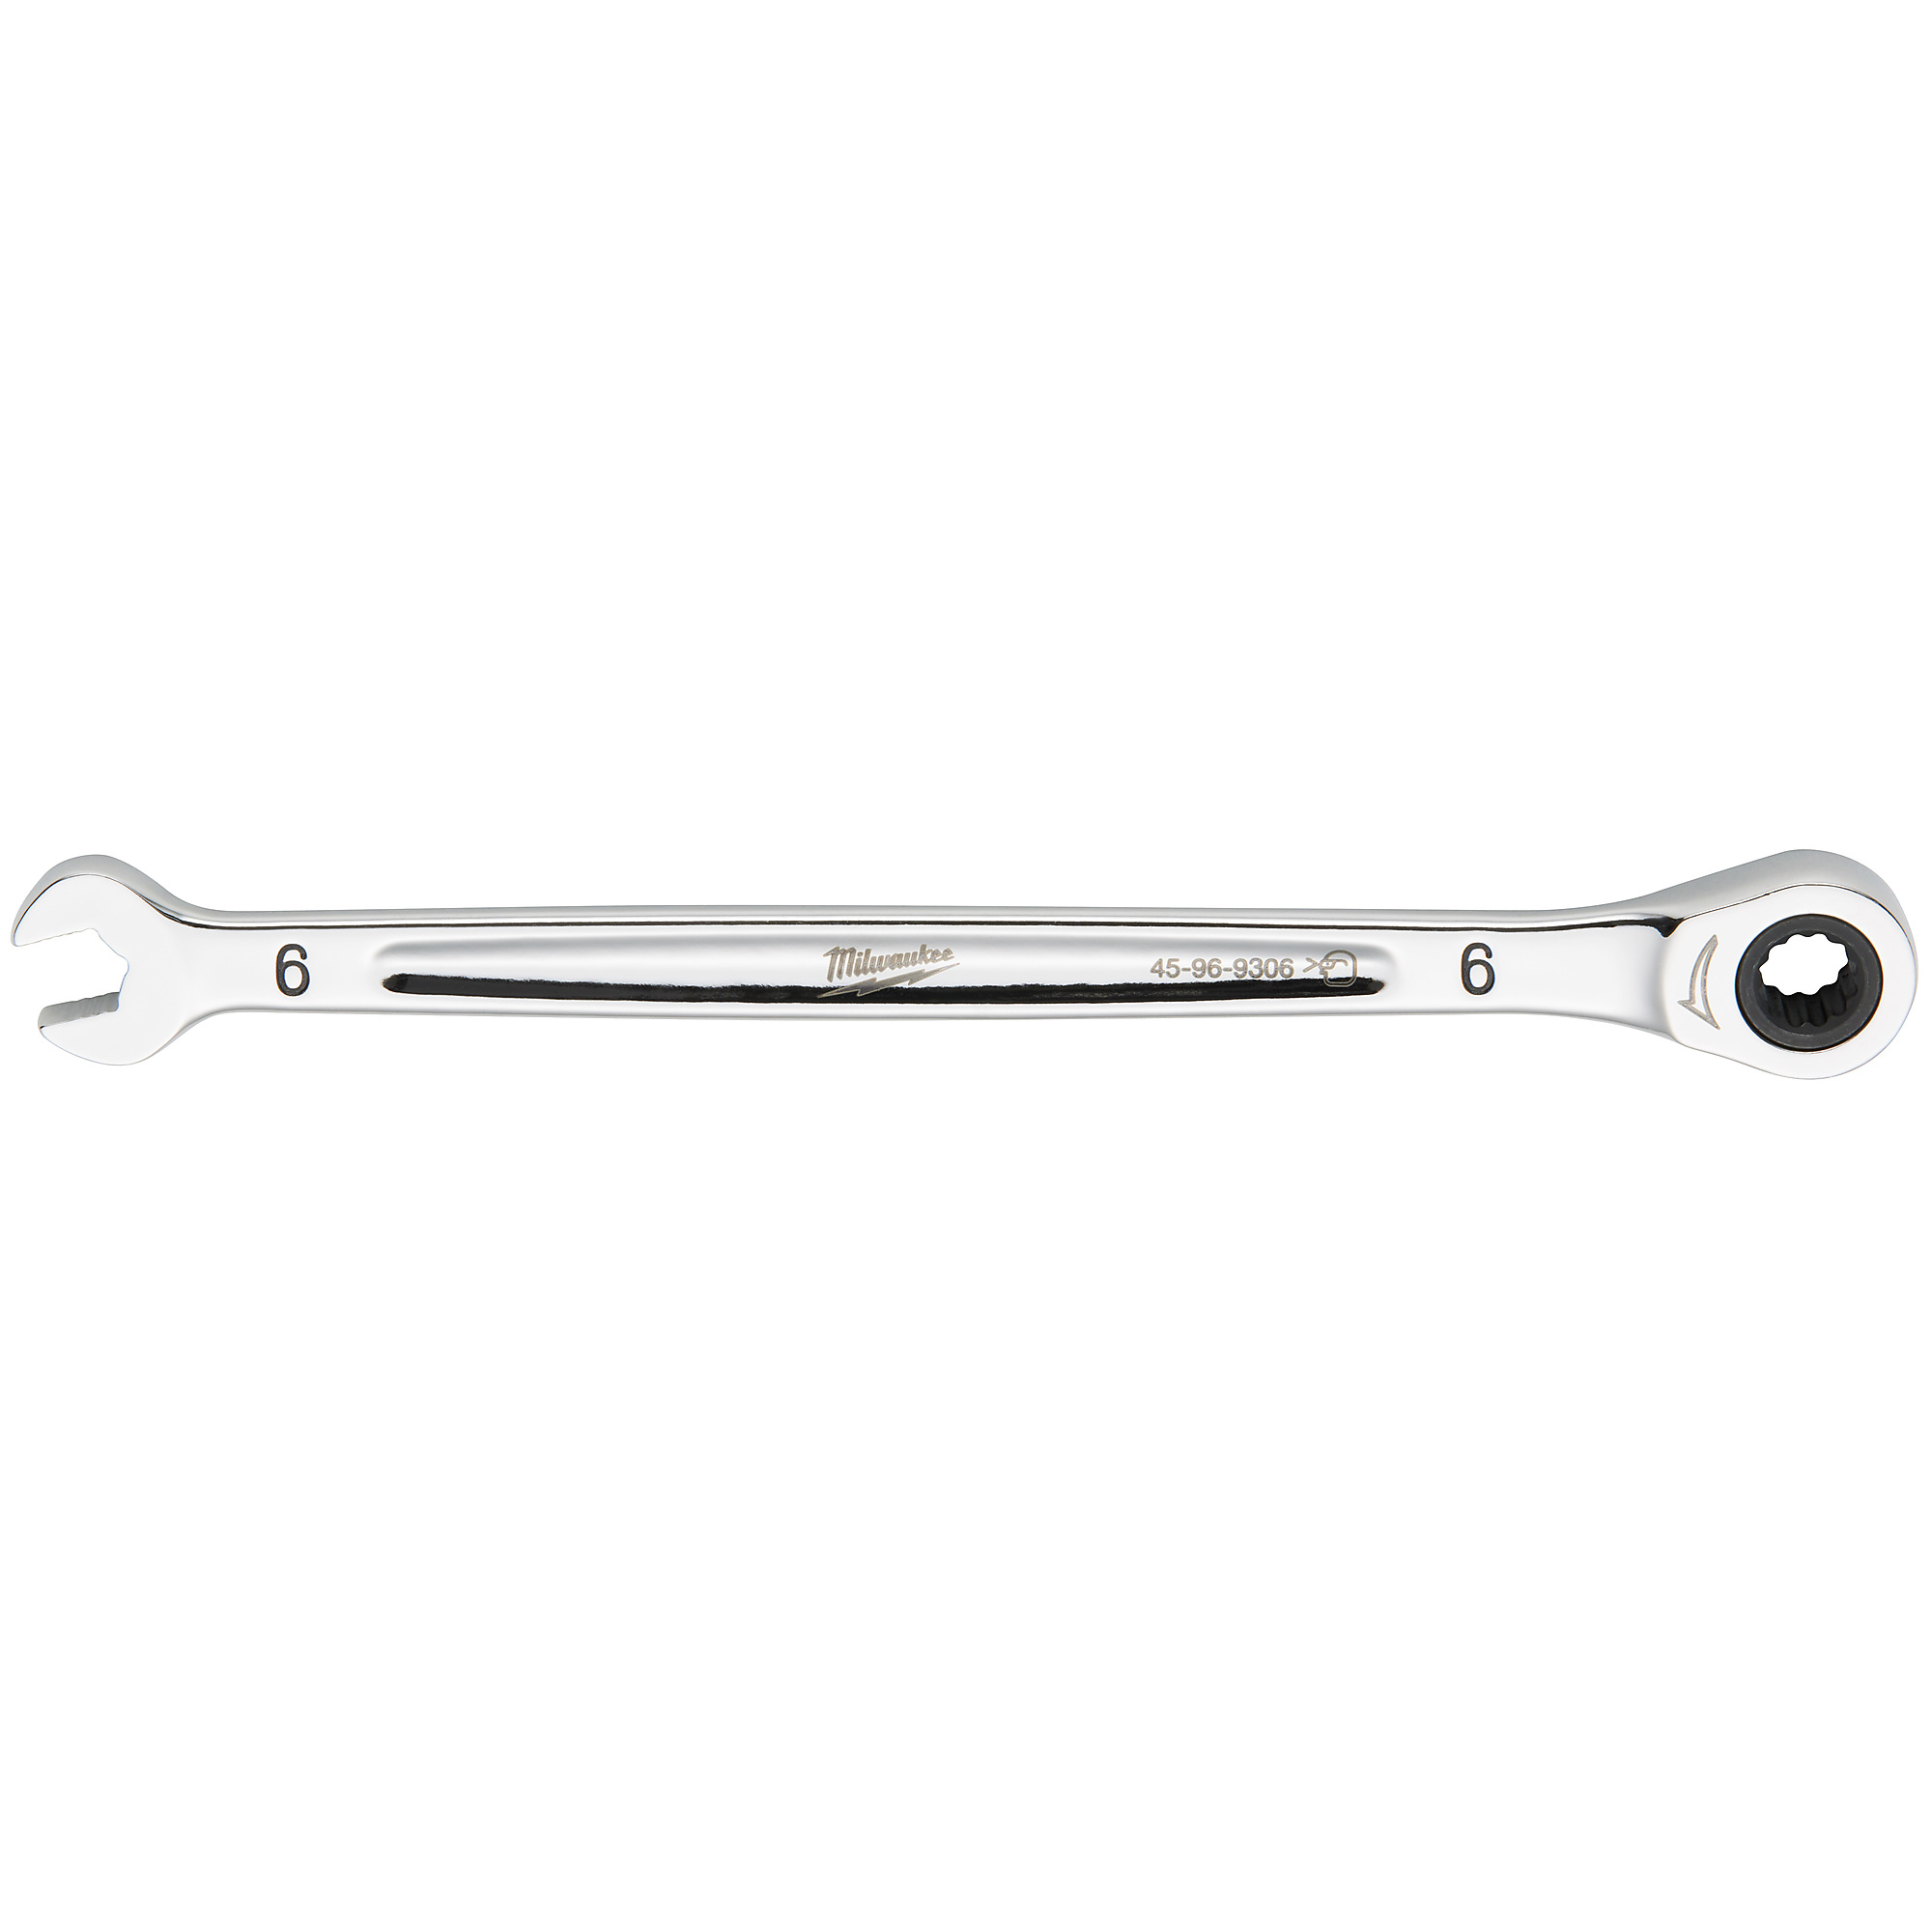 6MM RATCHETING COMBO WRENCH, Pieces (qty.) 1 Tool Length 5.04 in, Measurement Standard Metric, Model - Milwaukee 45-96-9306